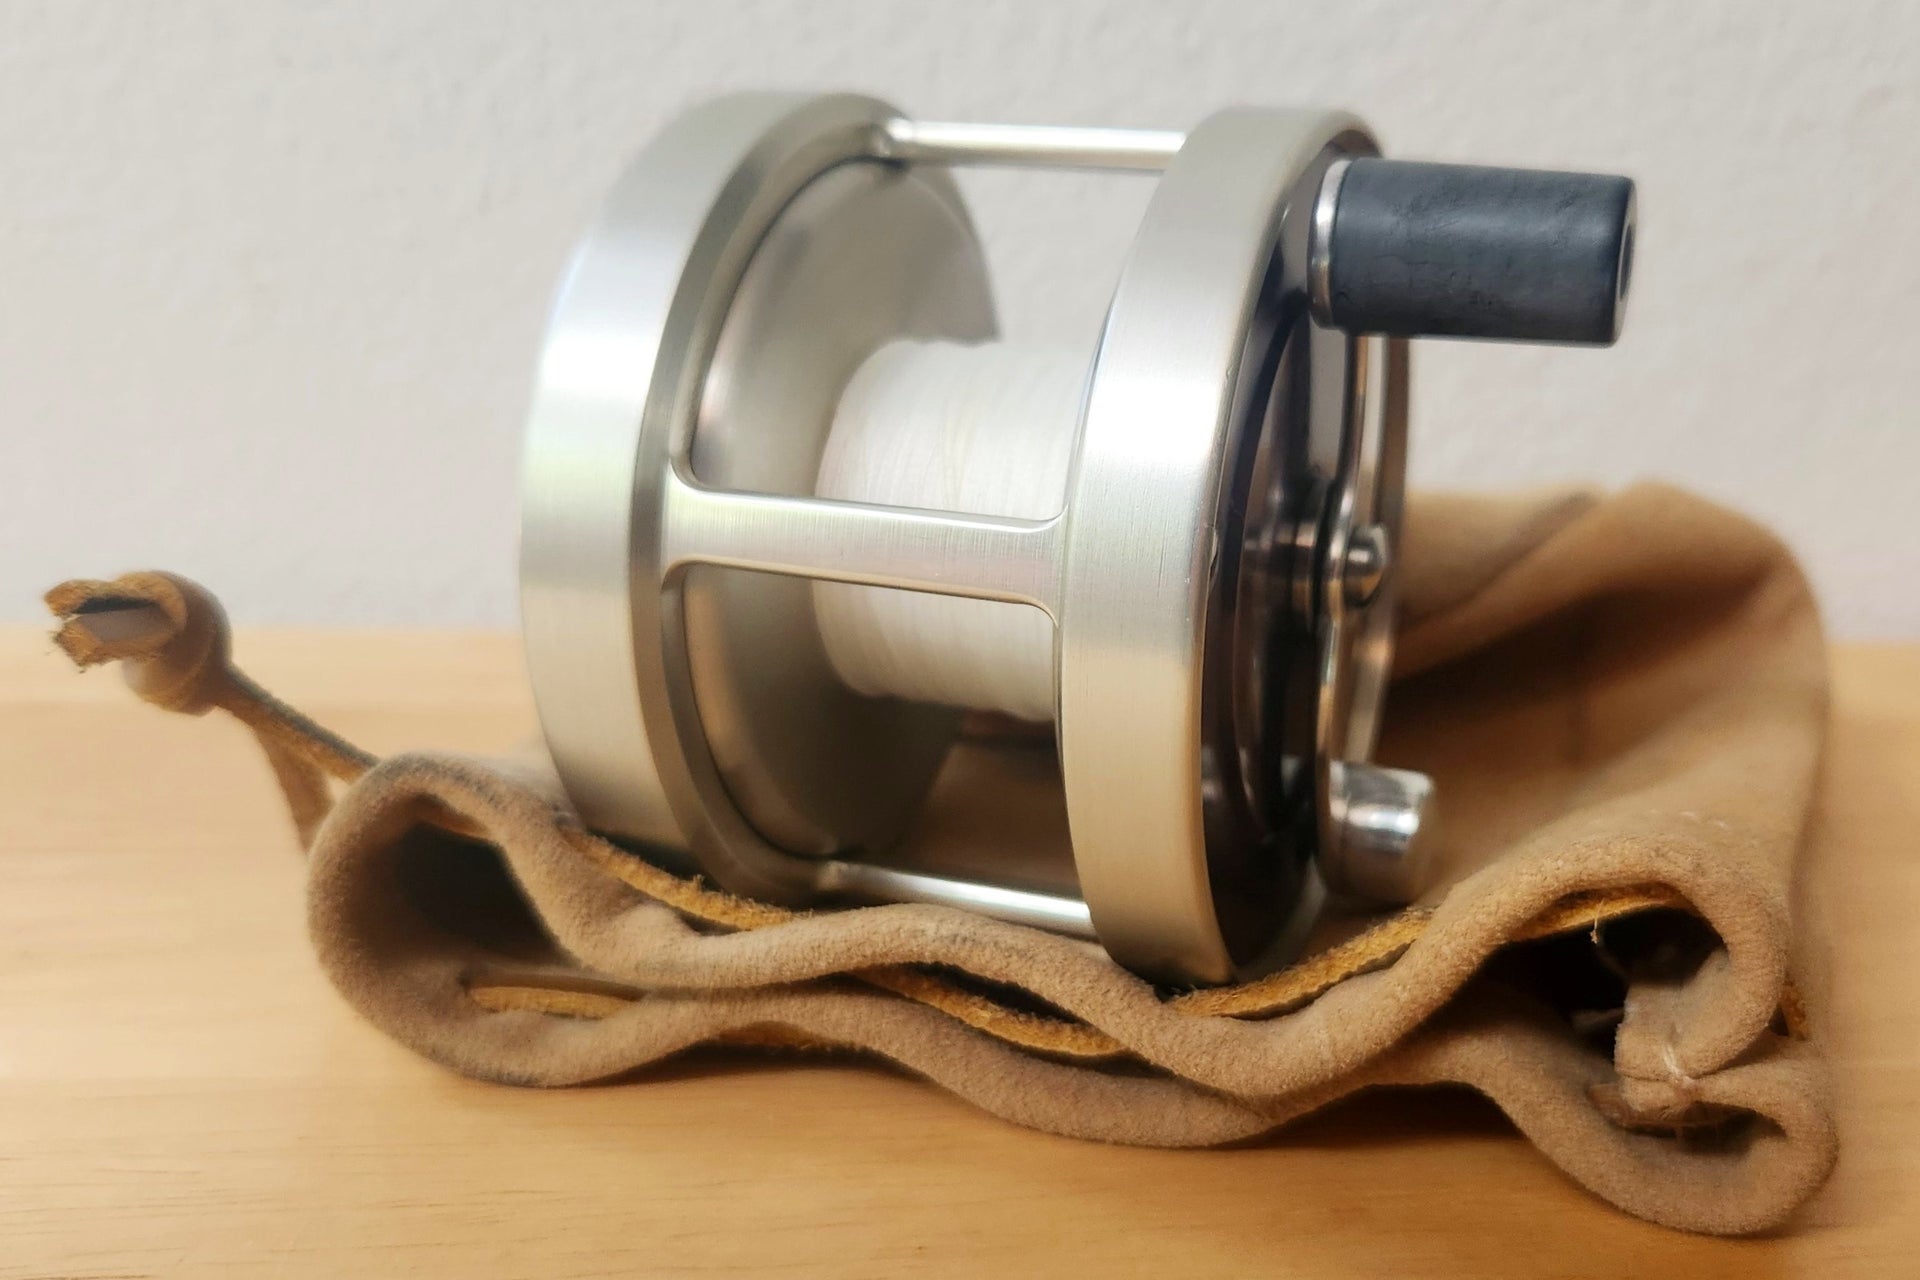 Bogdan Model 0 Salmon Reel - Excellent Condition; Reduced